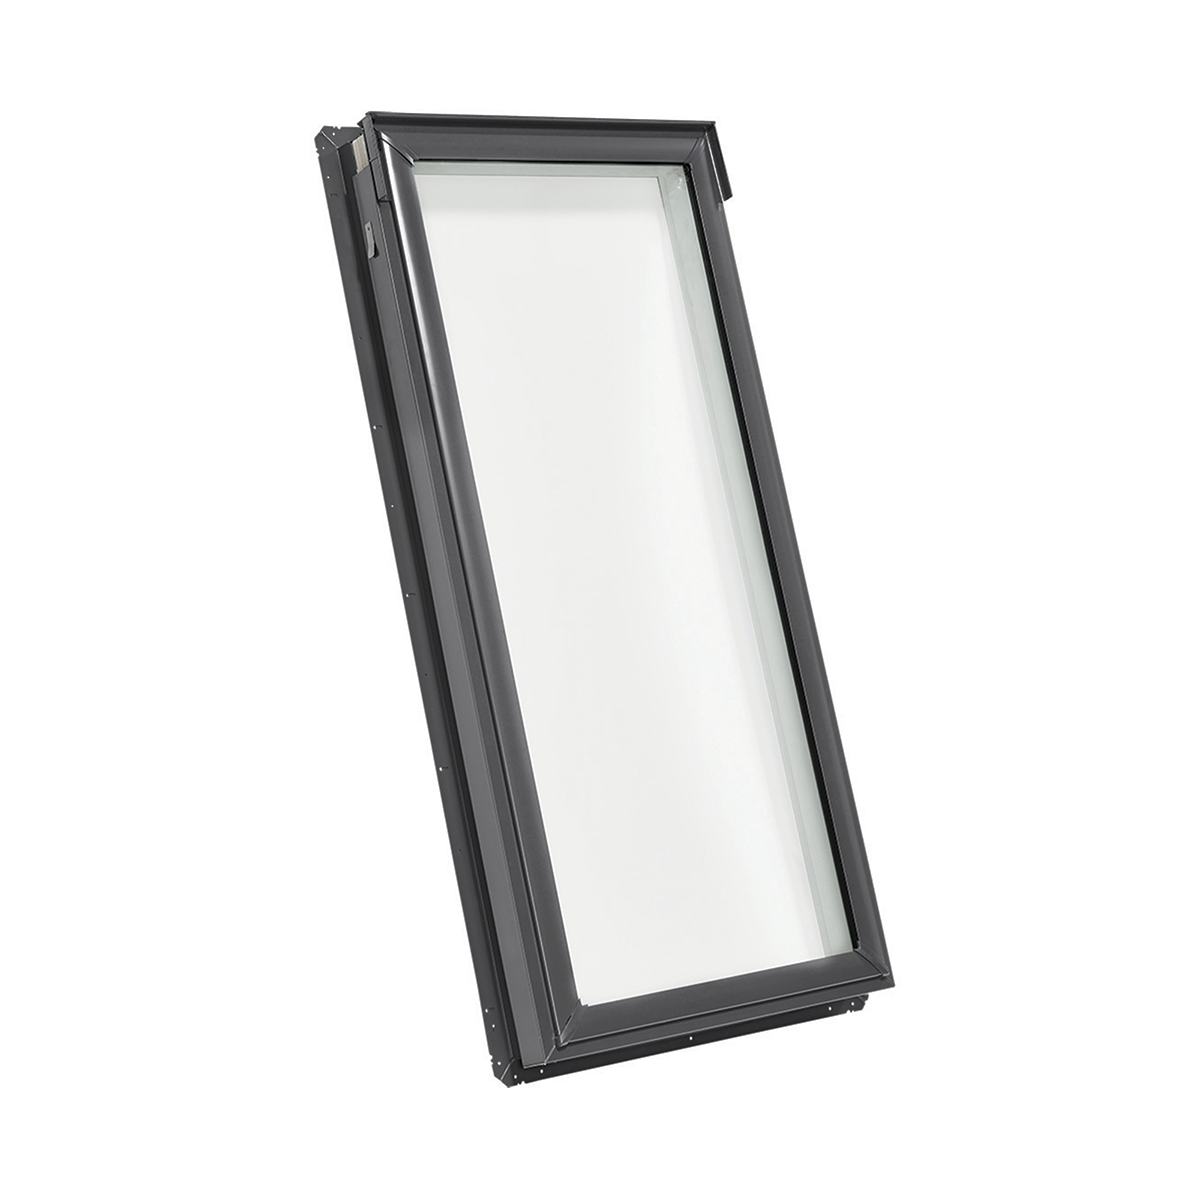 Fixed Deck-Mount Skylight with Laminated Low-E3 Glass - 44-1/4 in. x 45-3/4 in. - FS S06